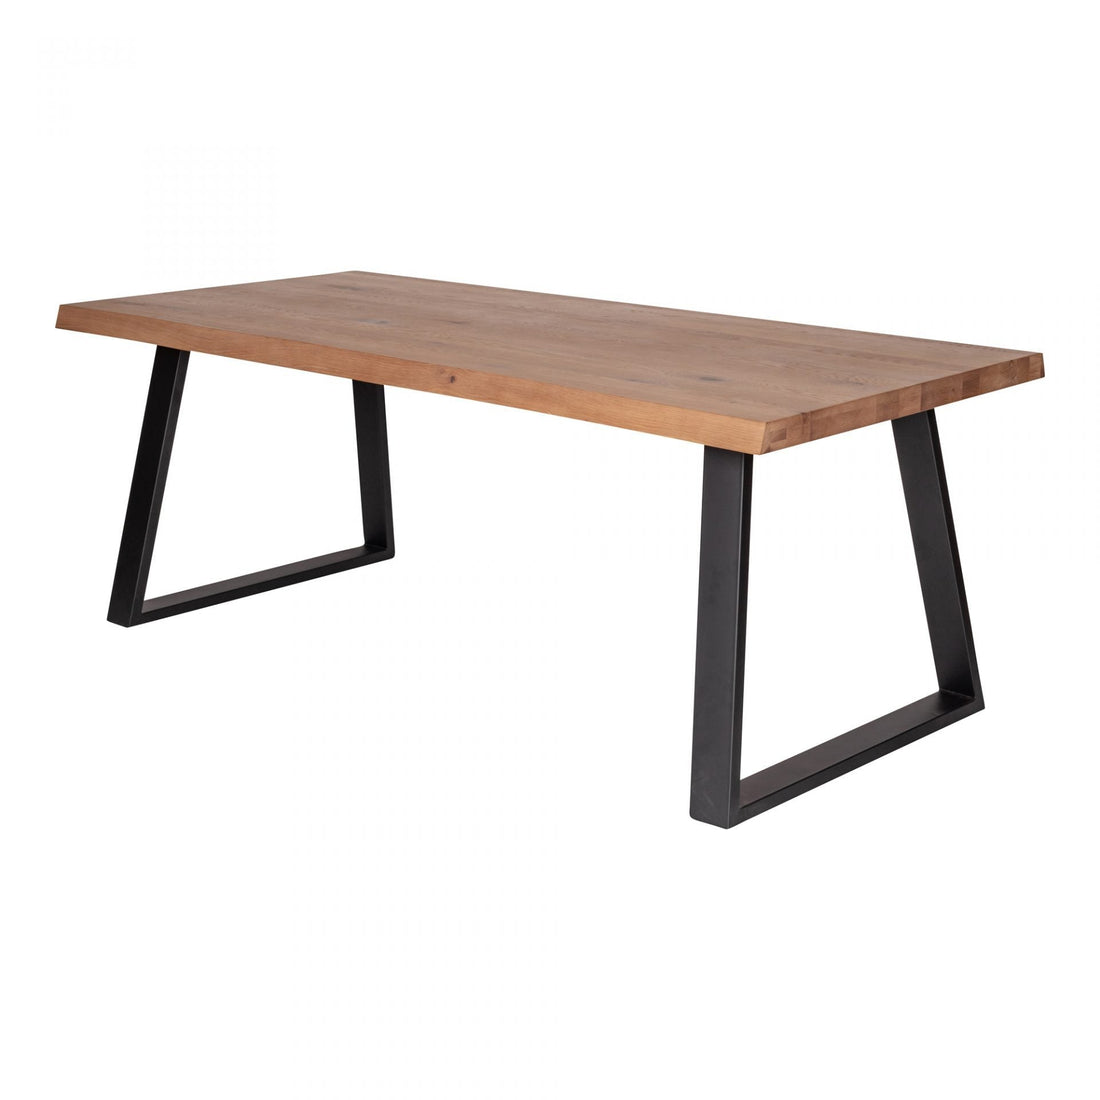 Live Edge Rectangular Dining Table: Rustic Dining with a Modern Twist